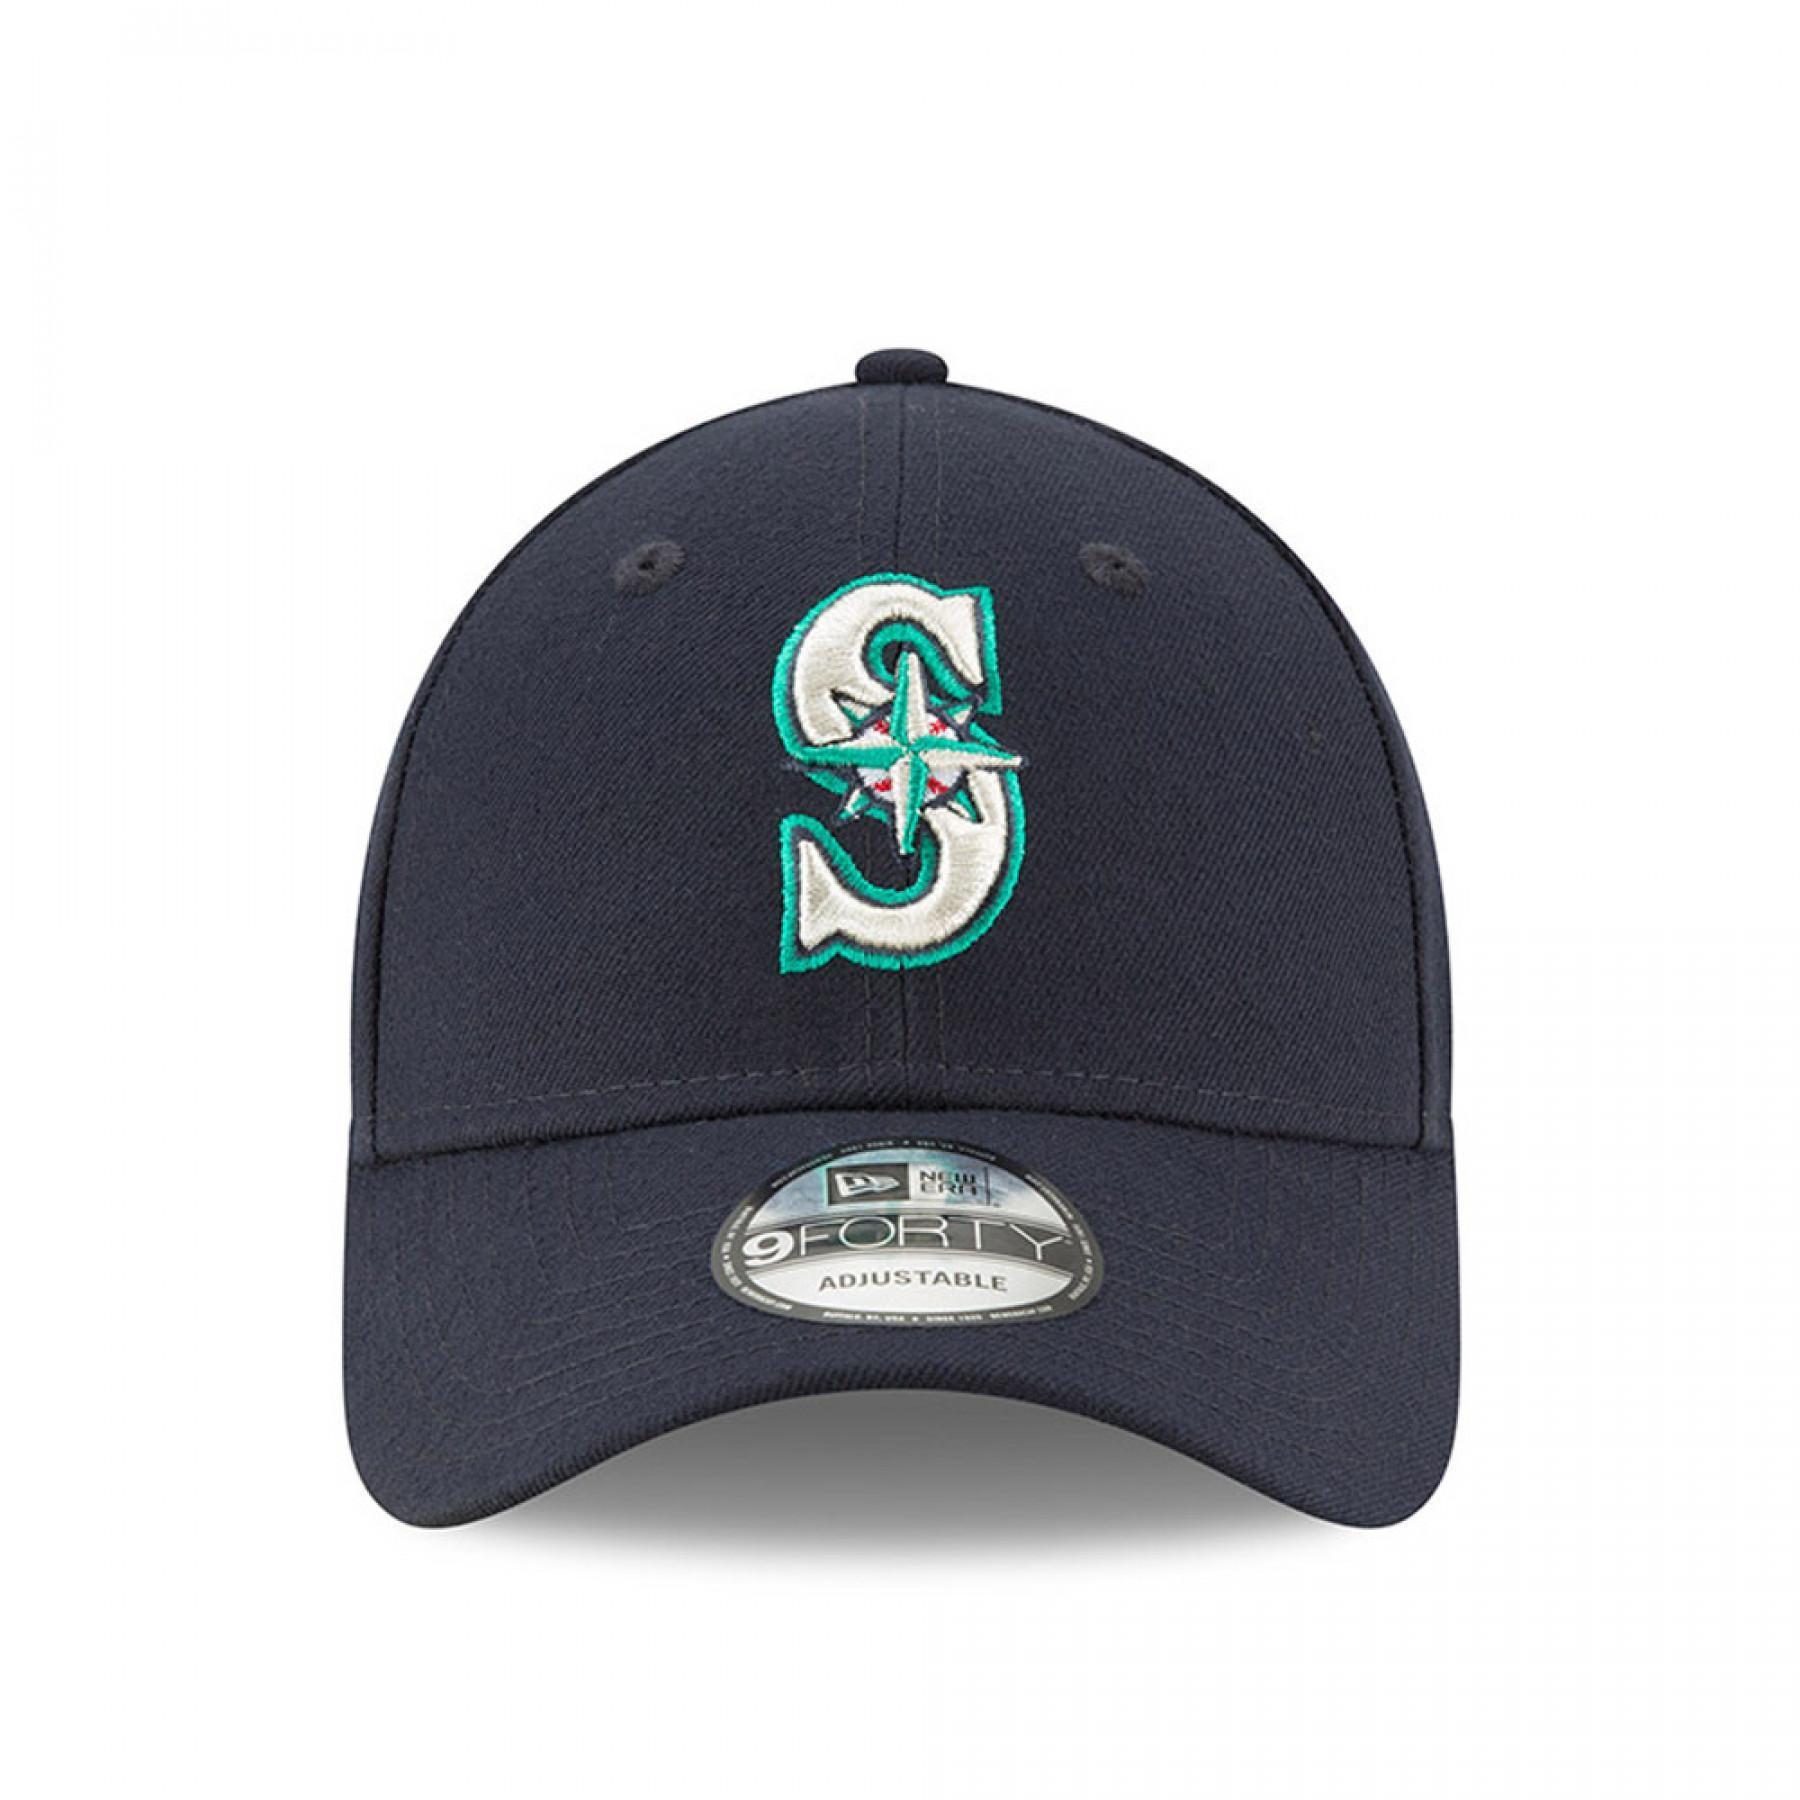 Kappe New Era 9FORTY The League Seattle Mariners